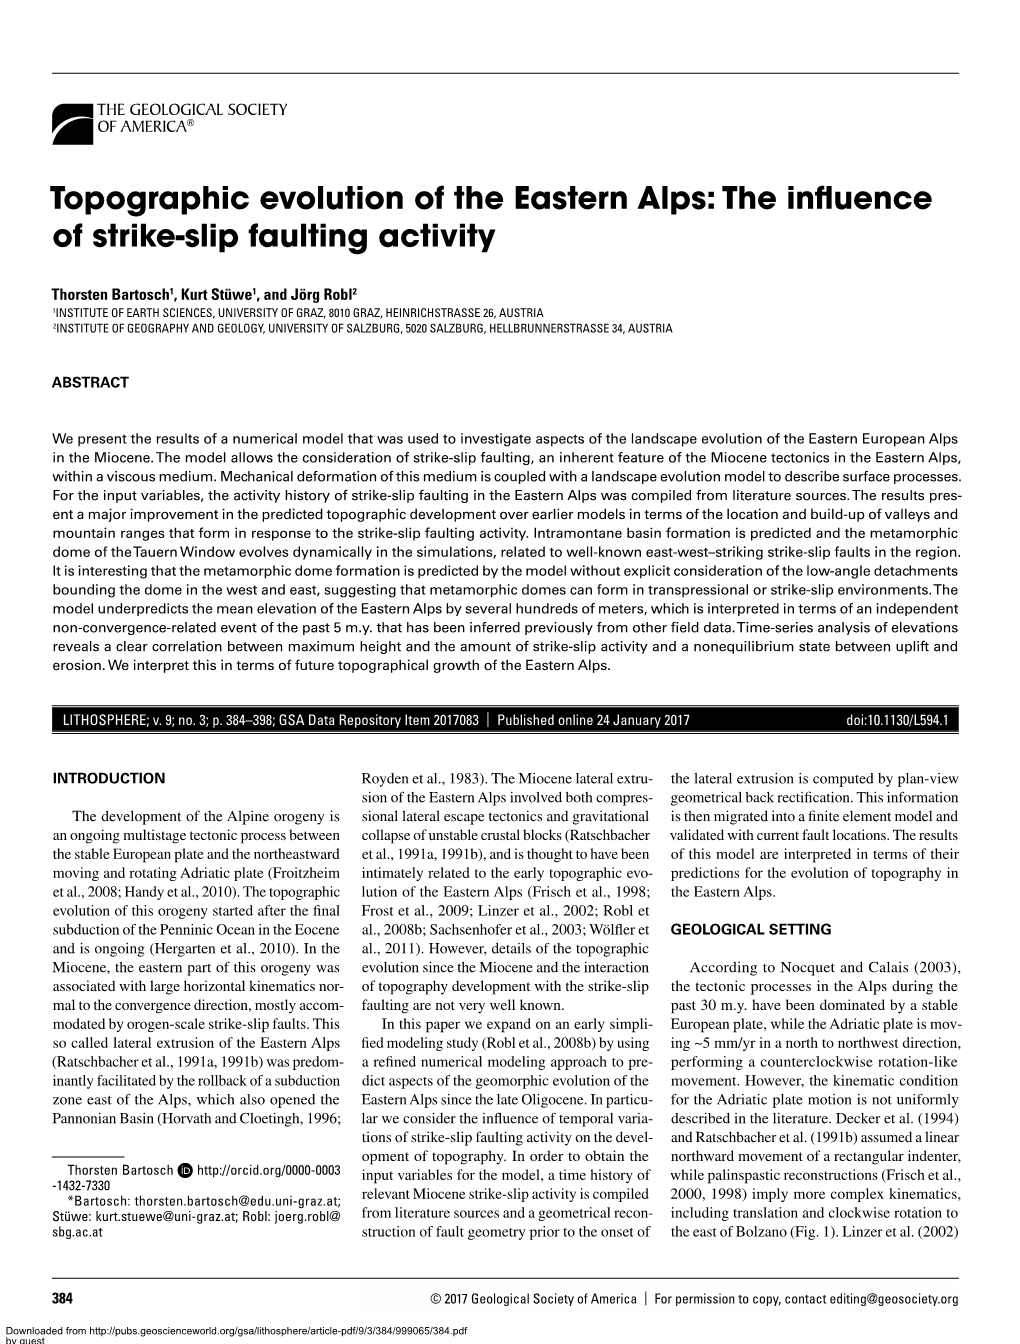 Topographic Evolution of the Eastern Alps: the Influence of Strike-Slip Faulting Activity